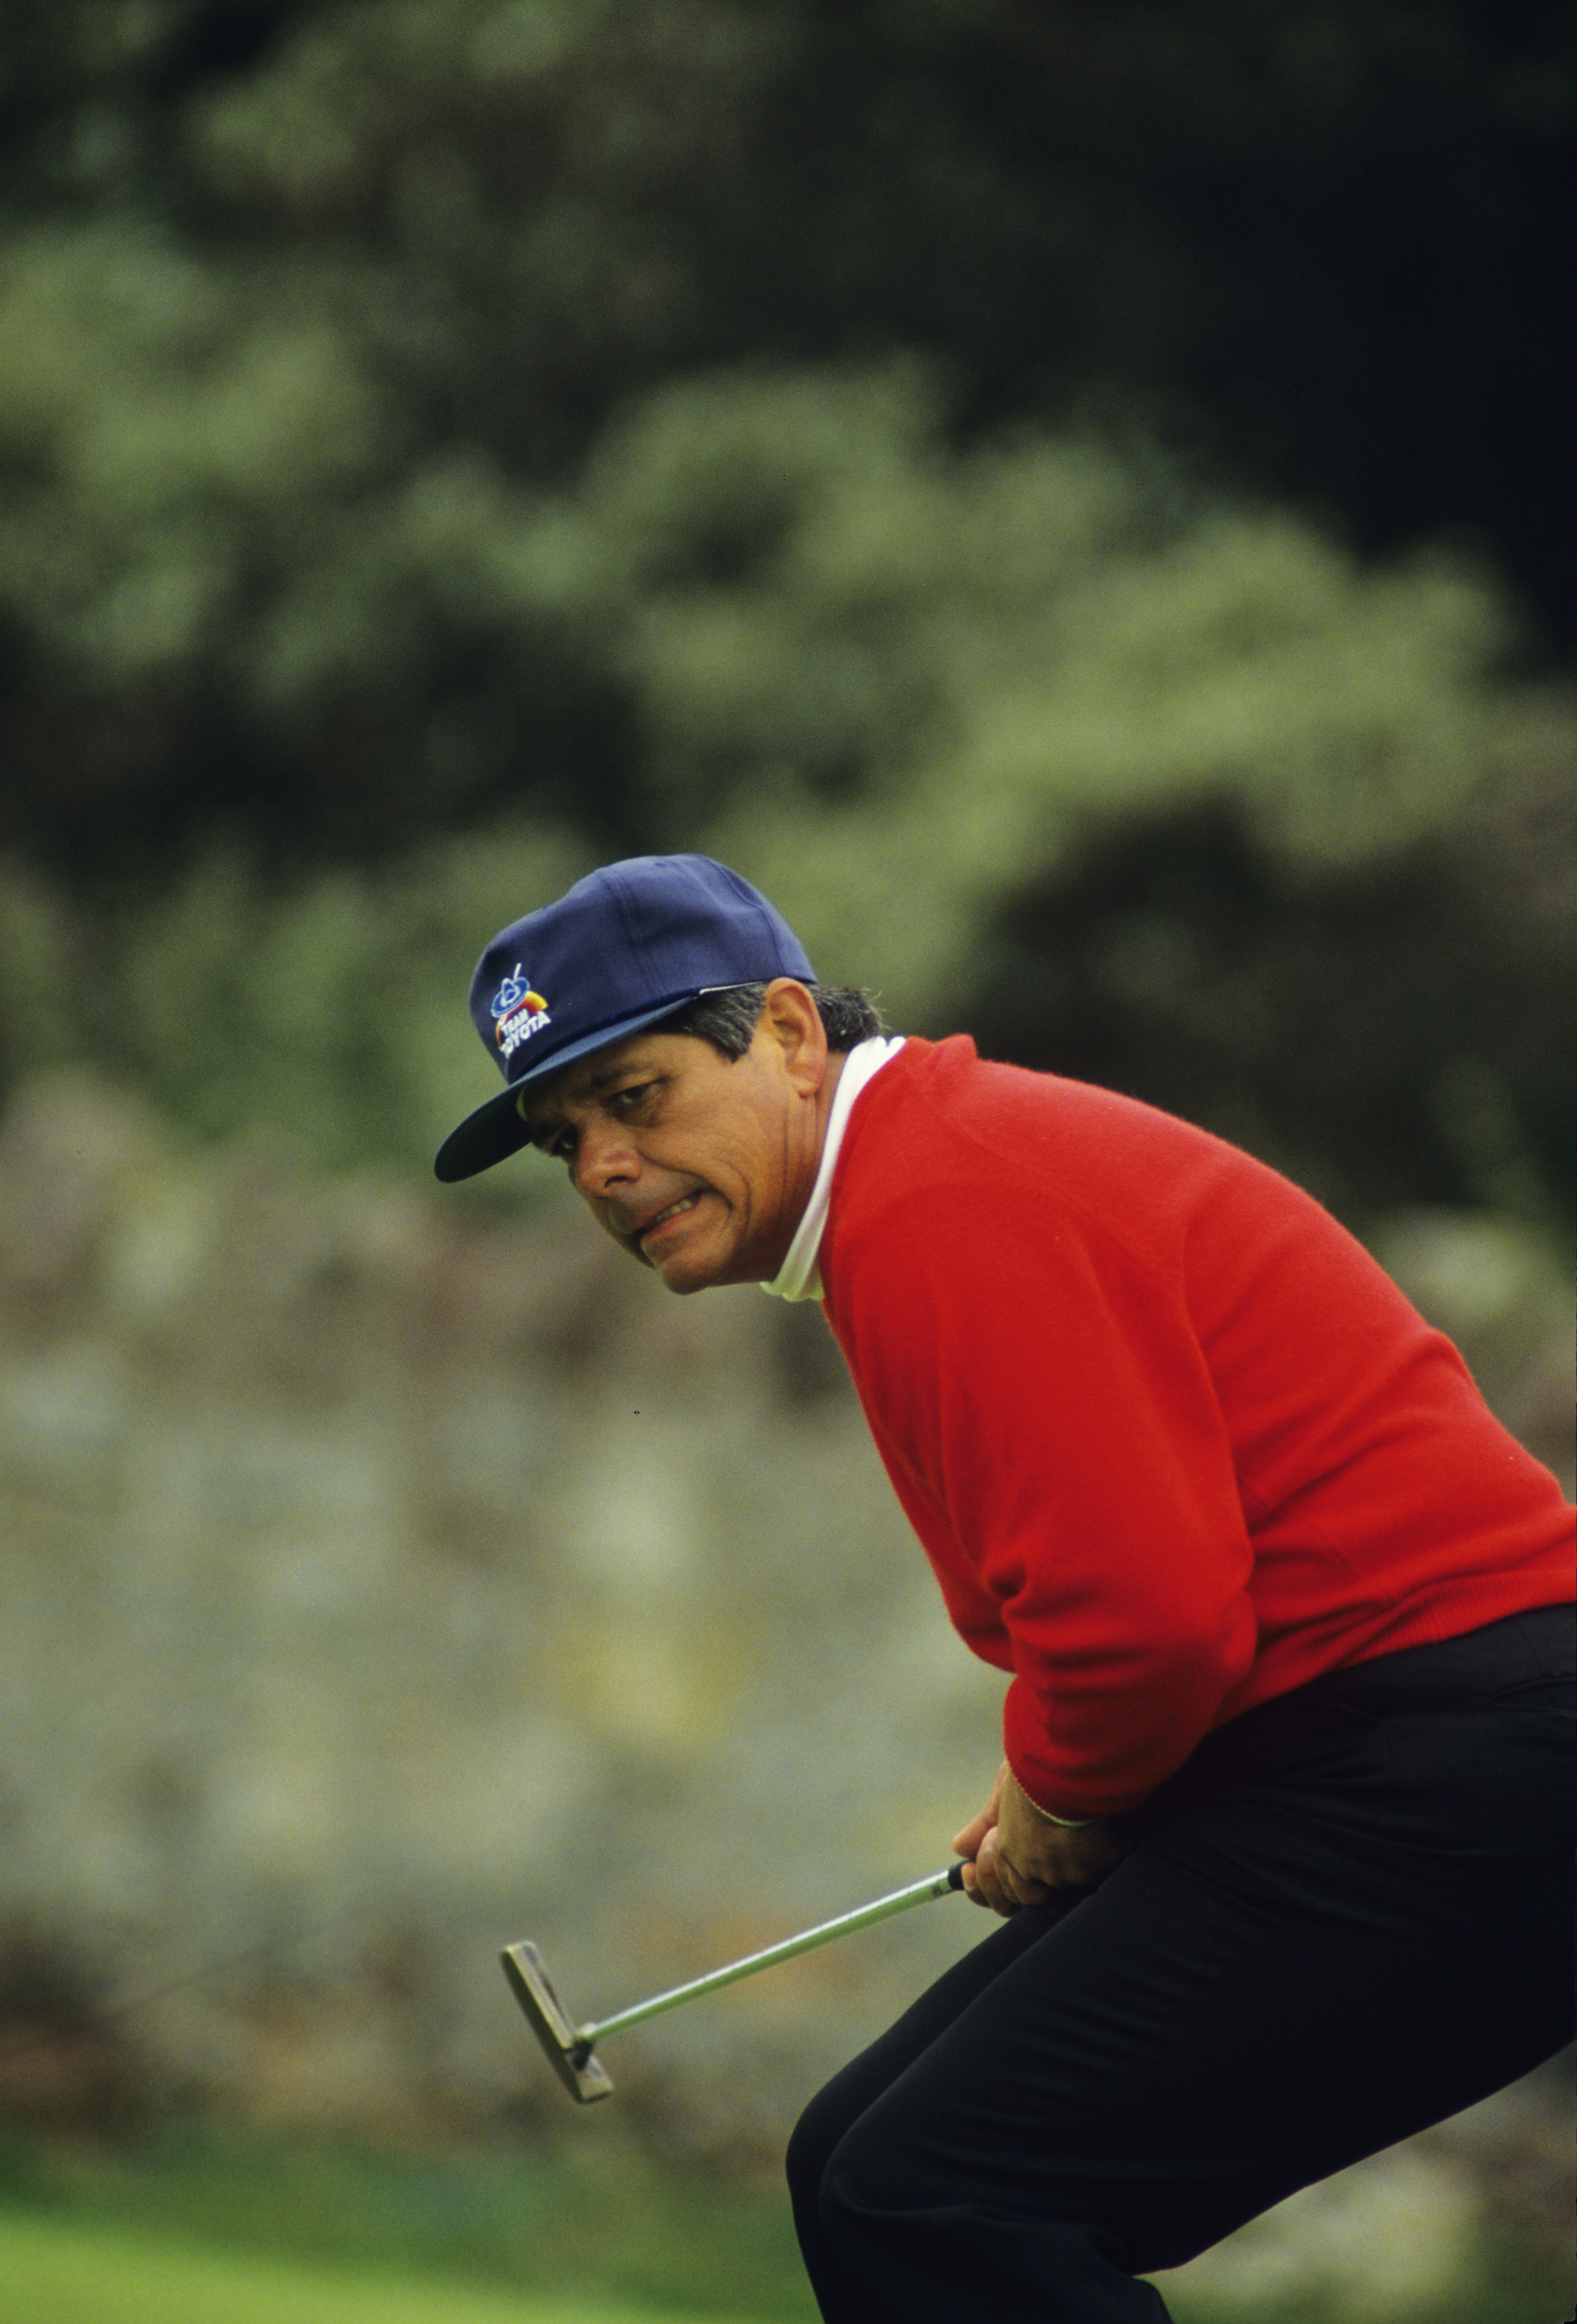 Lee Trevino famously hit the flagstick to win Muirfield 1972